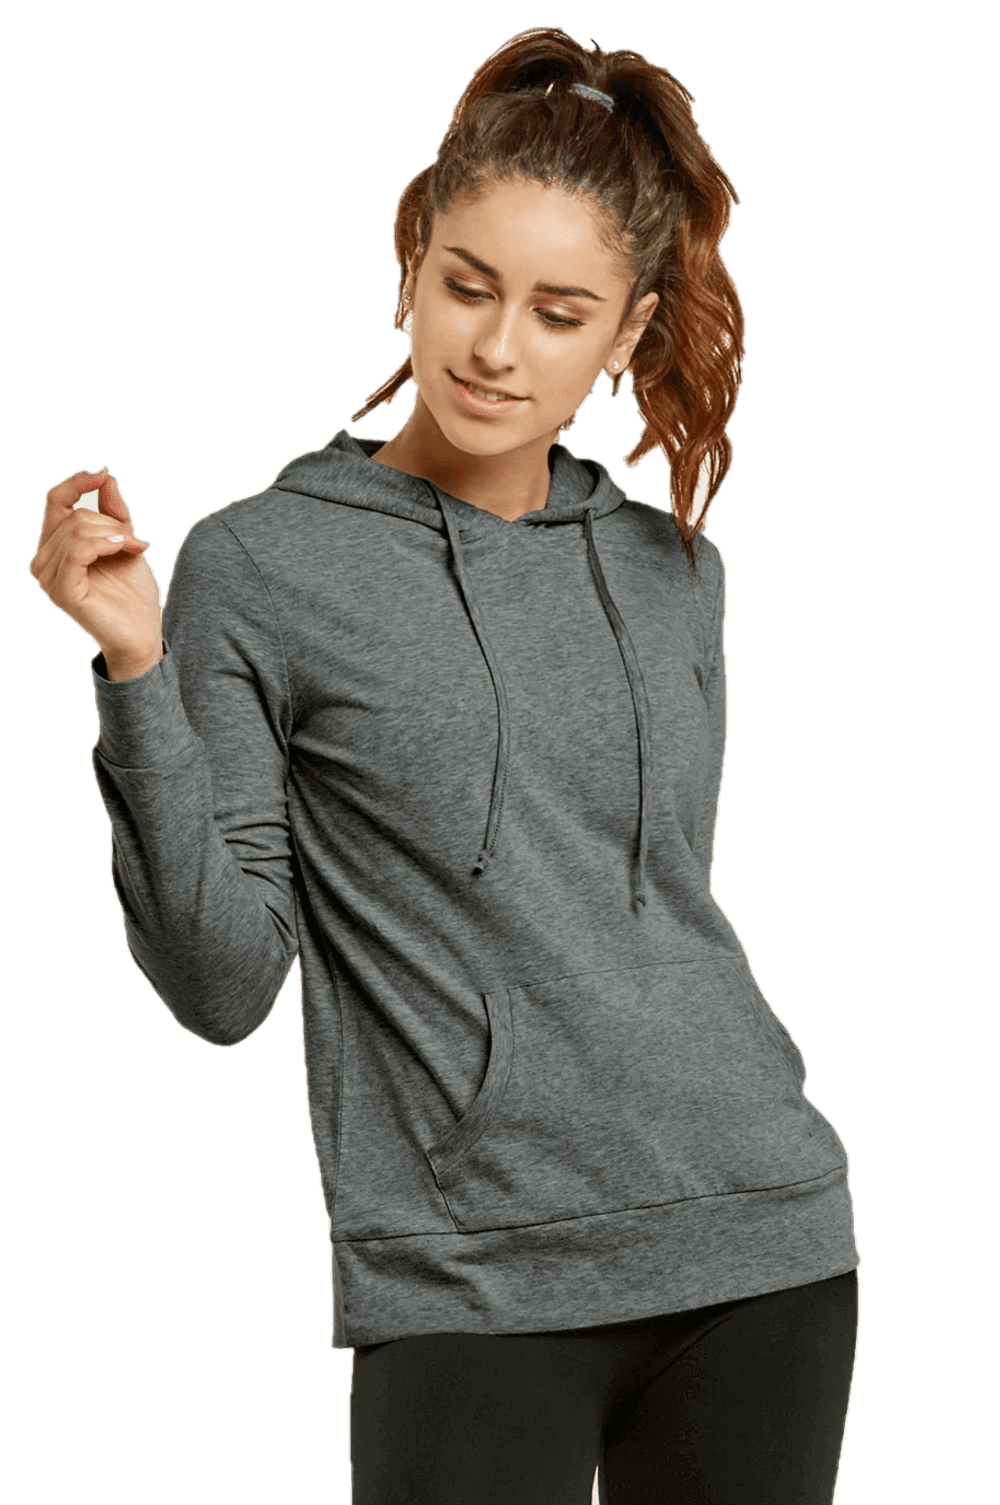  SMIDOW  clearance items outlet 90 percent off 2 Piece  Outfits Sweatsuit Women Halloween Pumpkin Coffee Pumpkin Spice Latte  Graphic Hoodie Sweatshirt and Sweatpants Army Green S : Sports & Outdoors